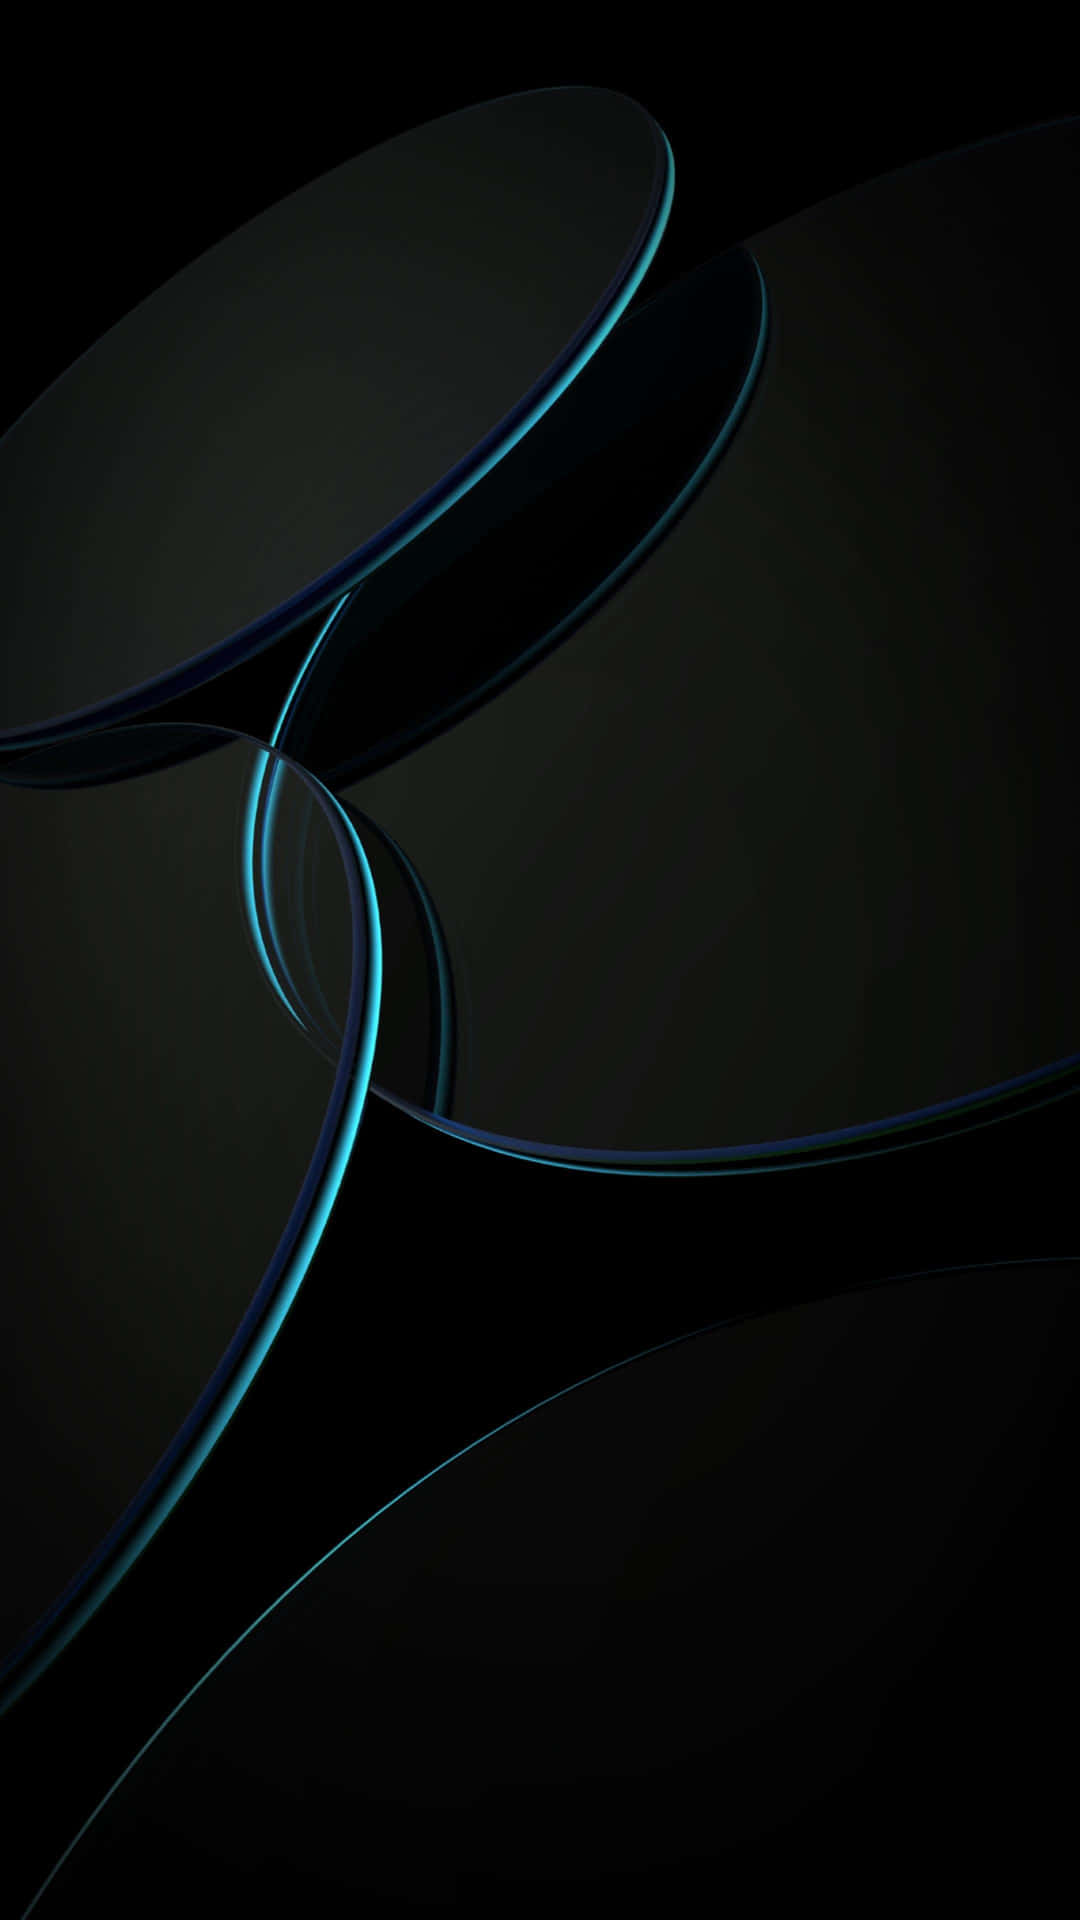 Black Circles With Blue Amoled Outline Wallpaper